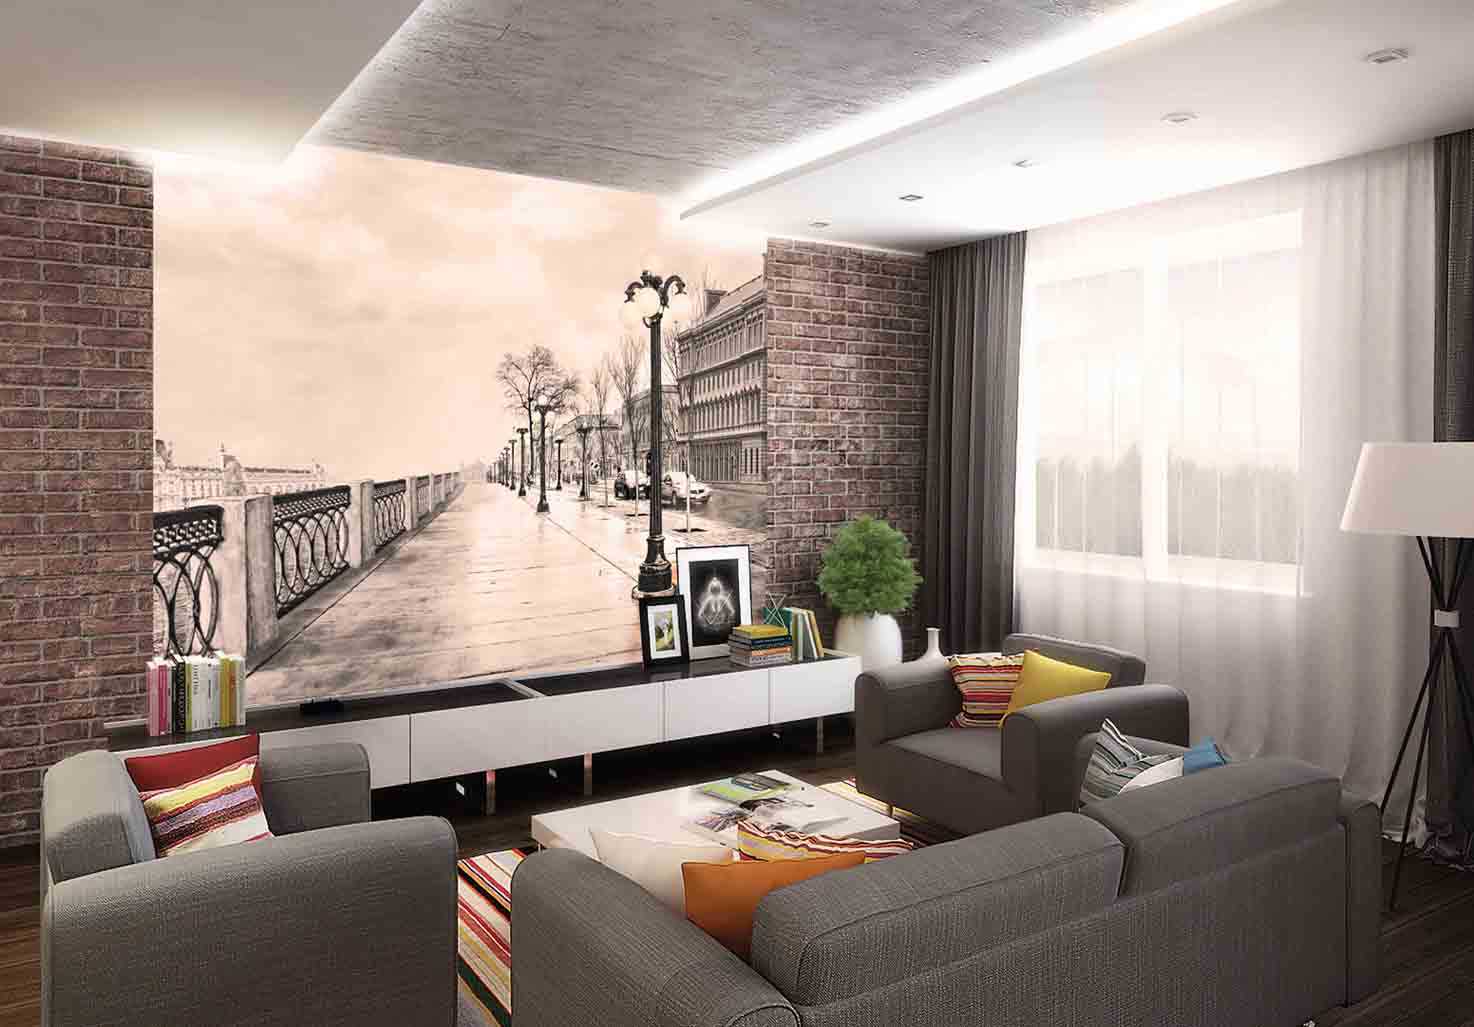 option for a beautiful interior design of the living room